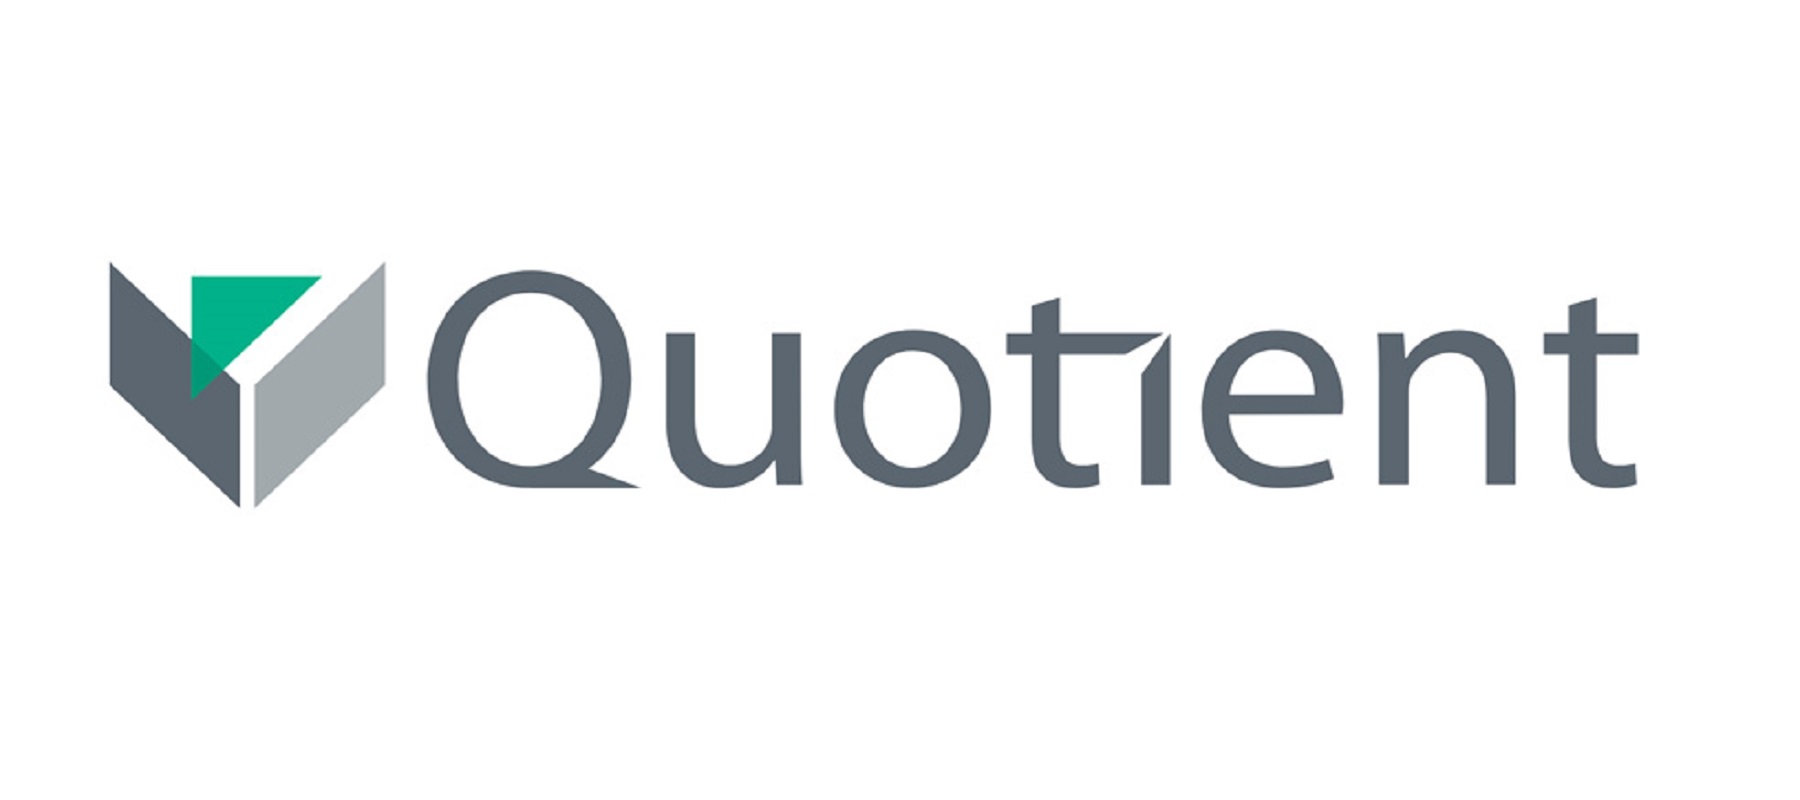 Media tech firm Quotient launches digital out-of-home platform for retailers